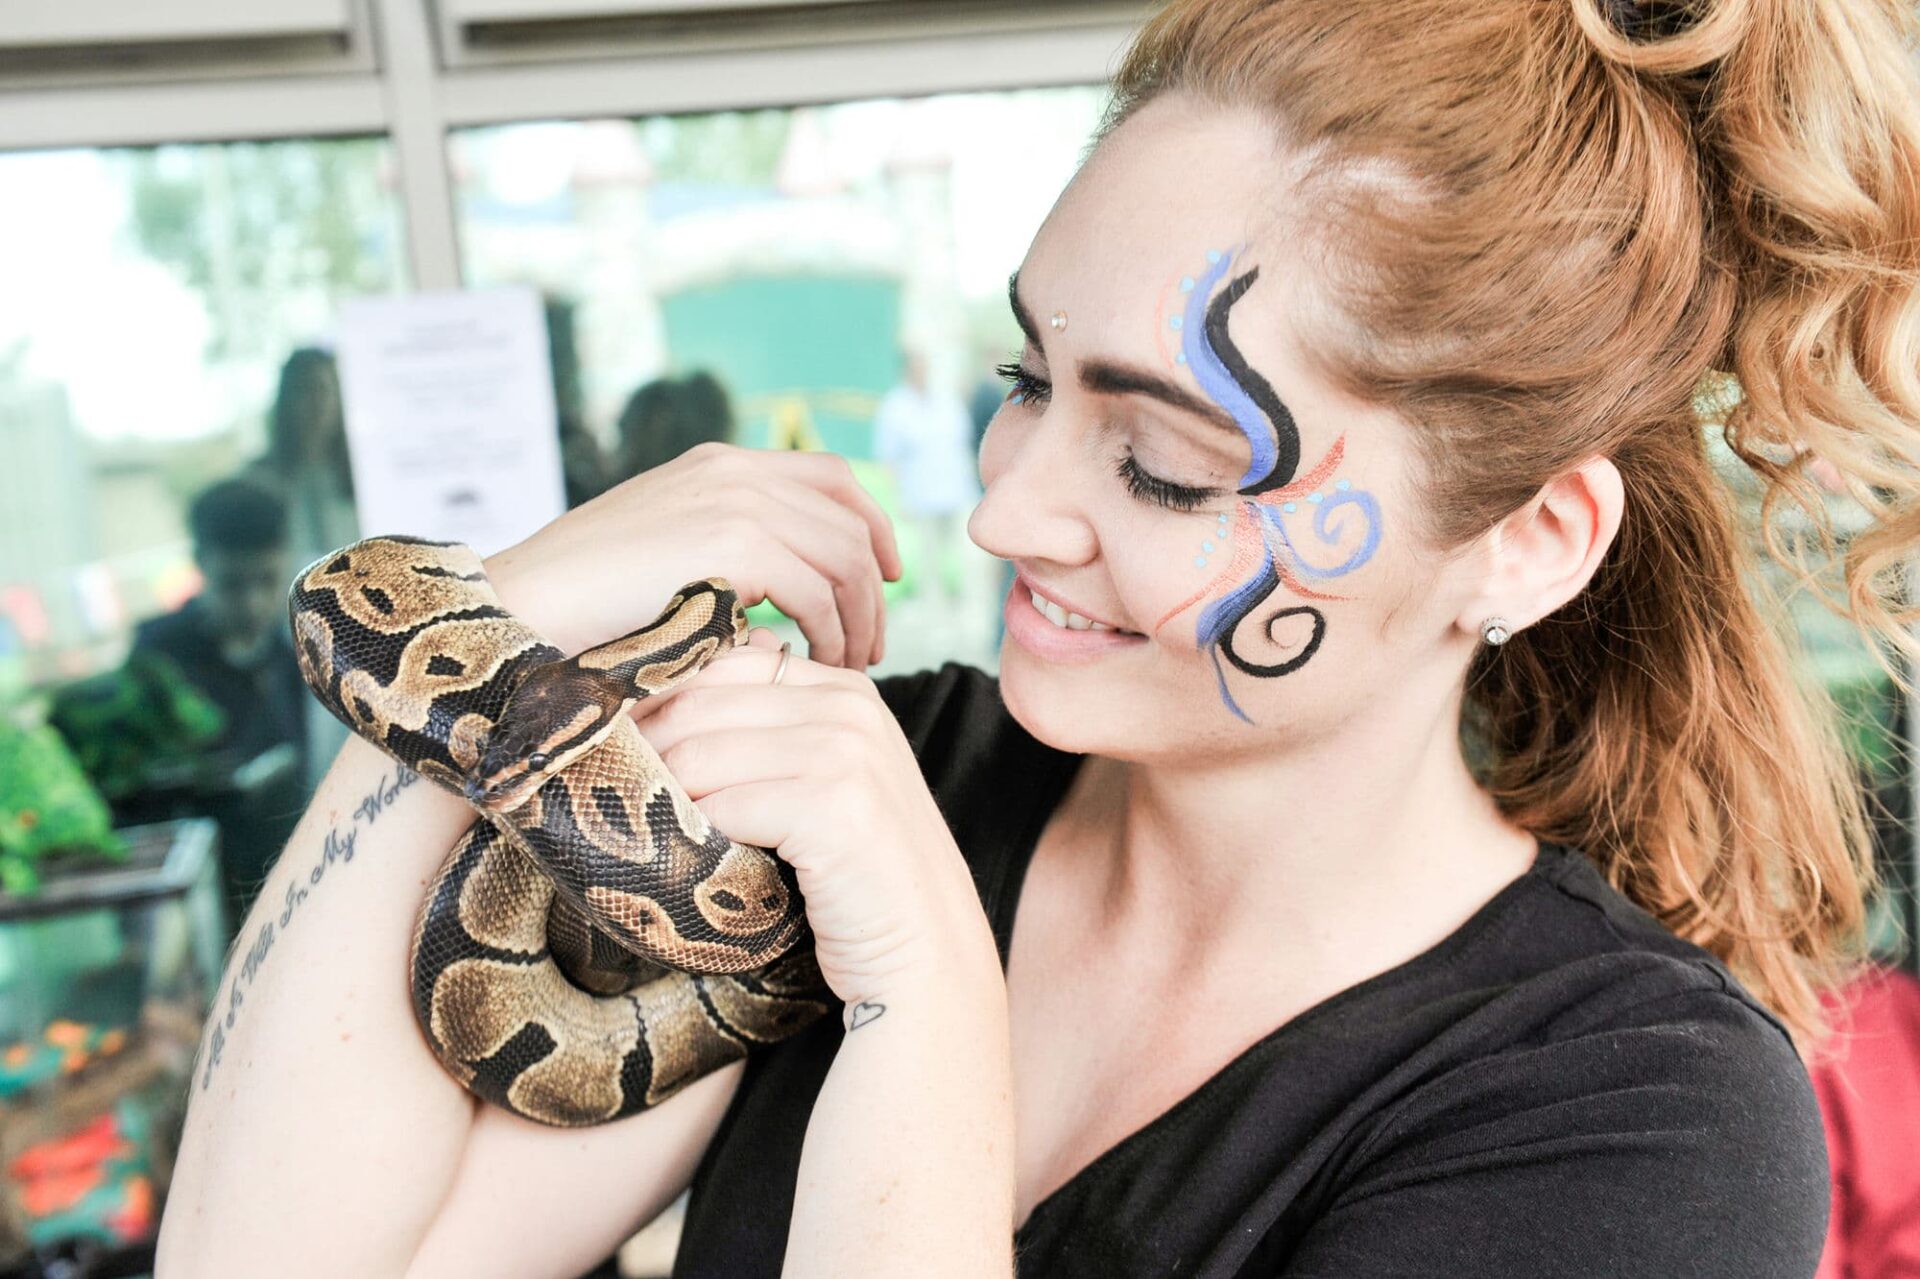 An attractive young woman is holding a constrictor snake and smiling. Her face is painted